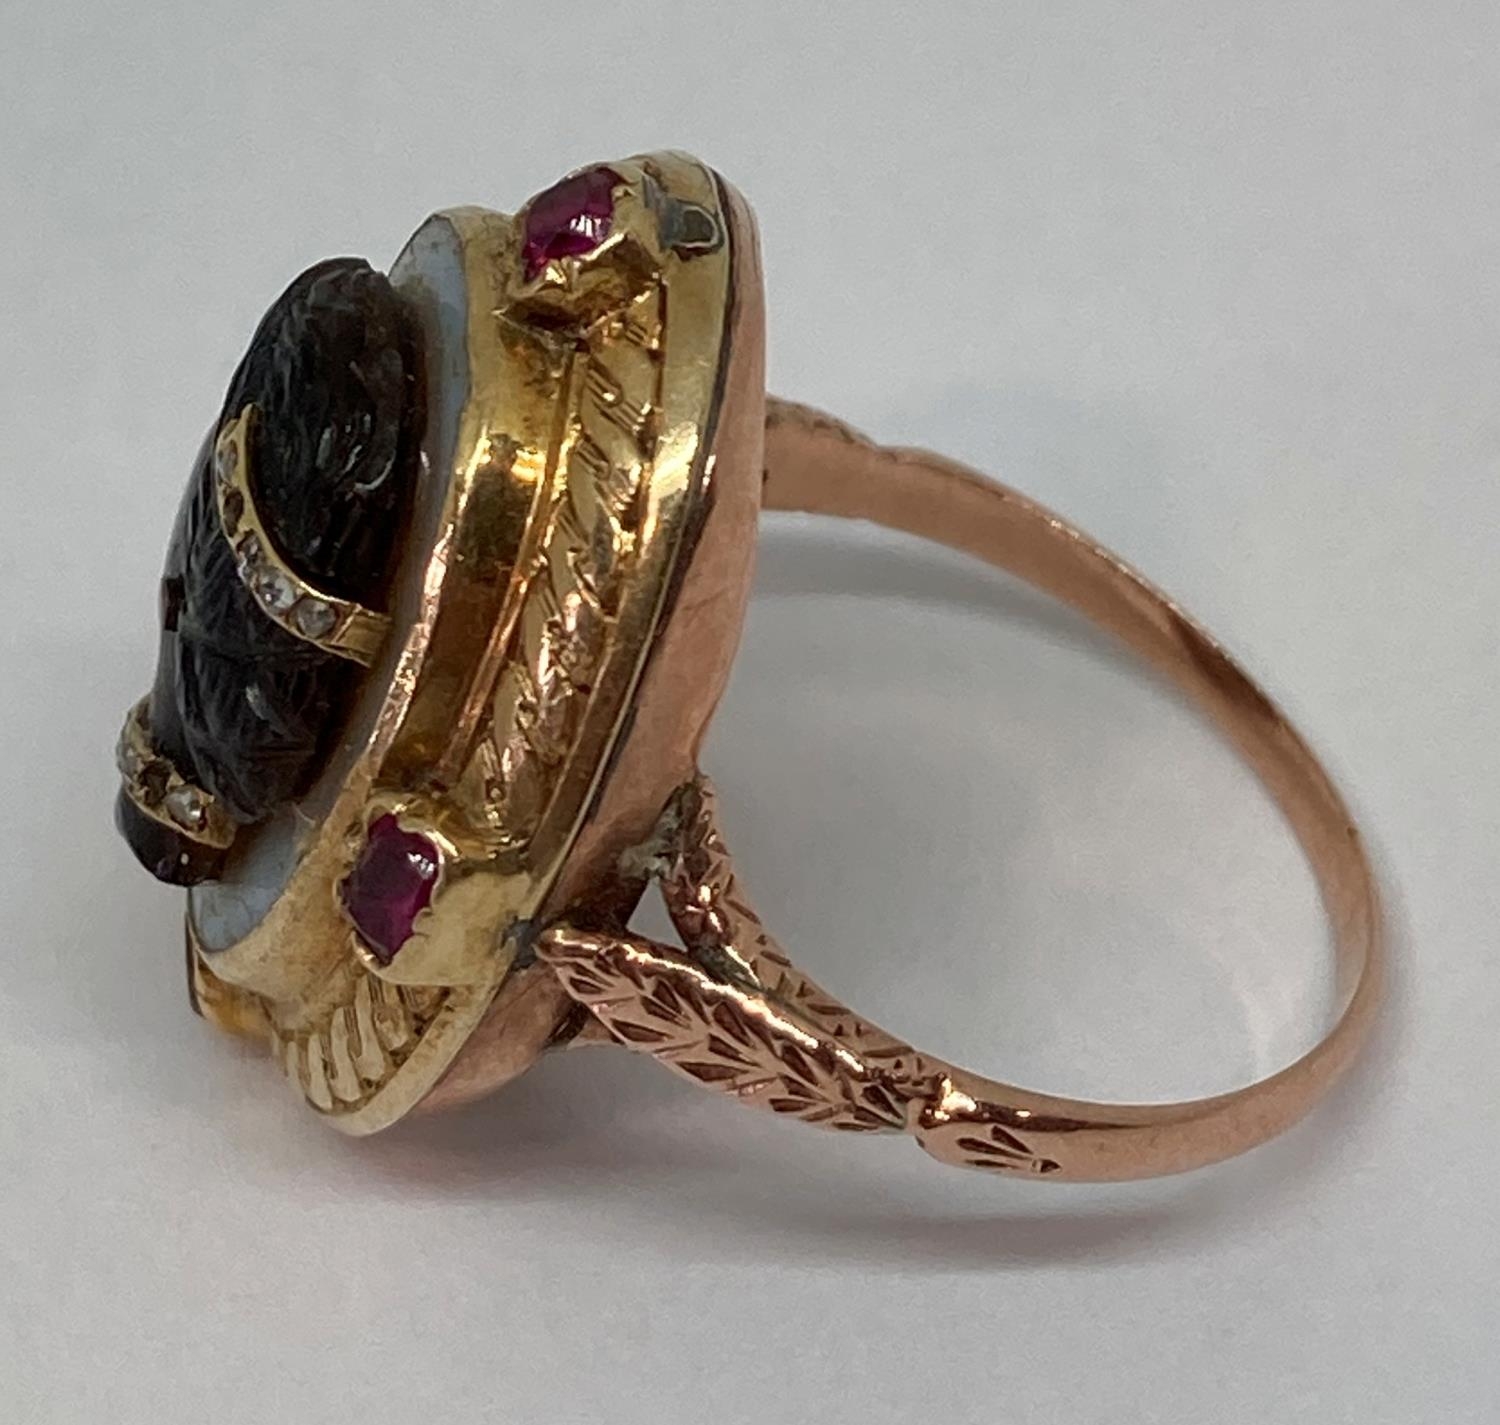 Fine antique blackamoor cameo ring depicting a lady, the agate cameo set with rose cut diamonds - Image 5 of 9